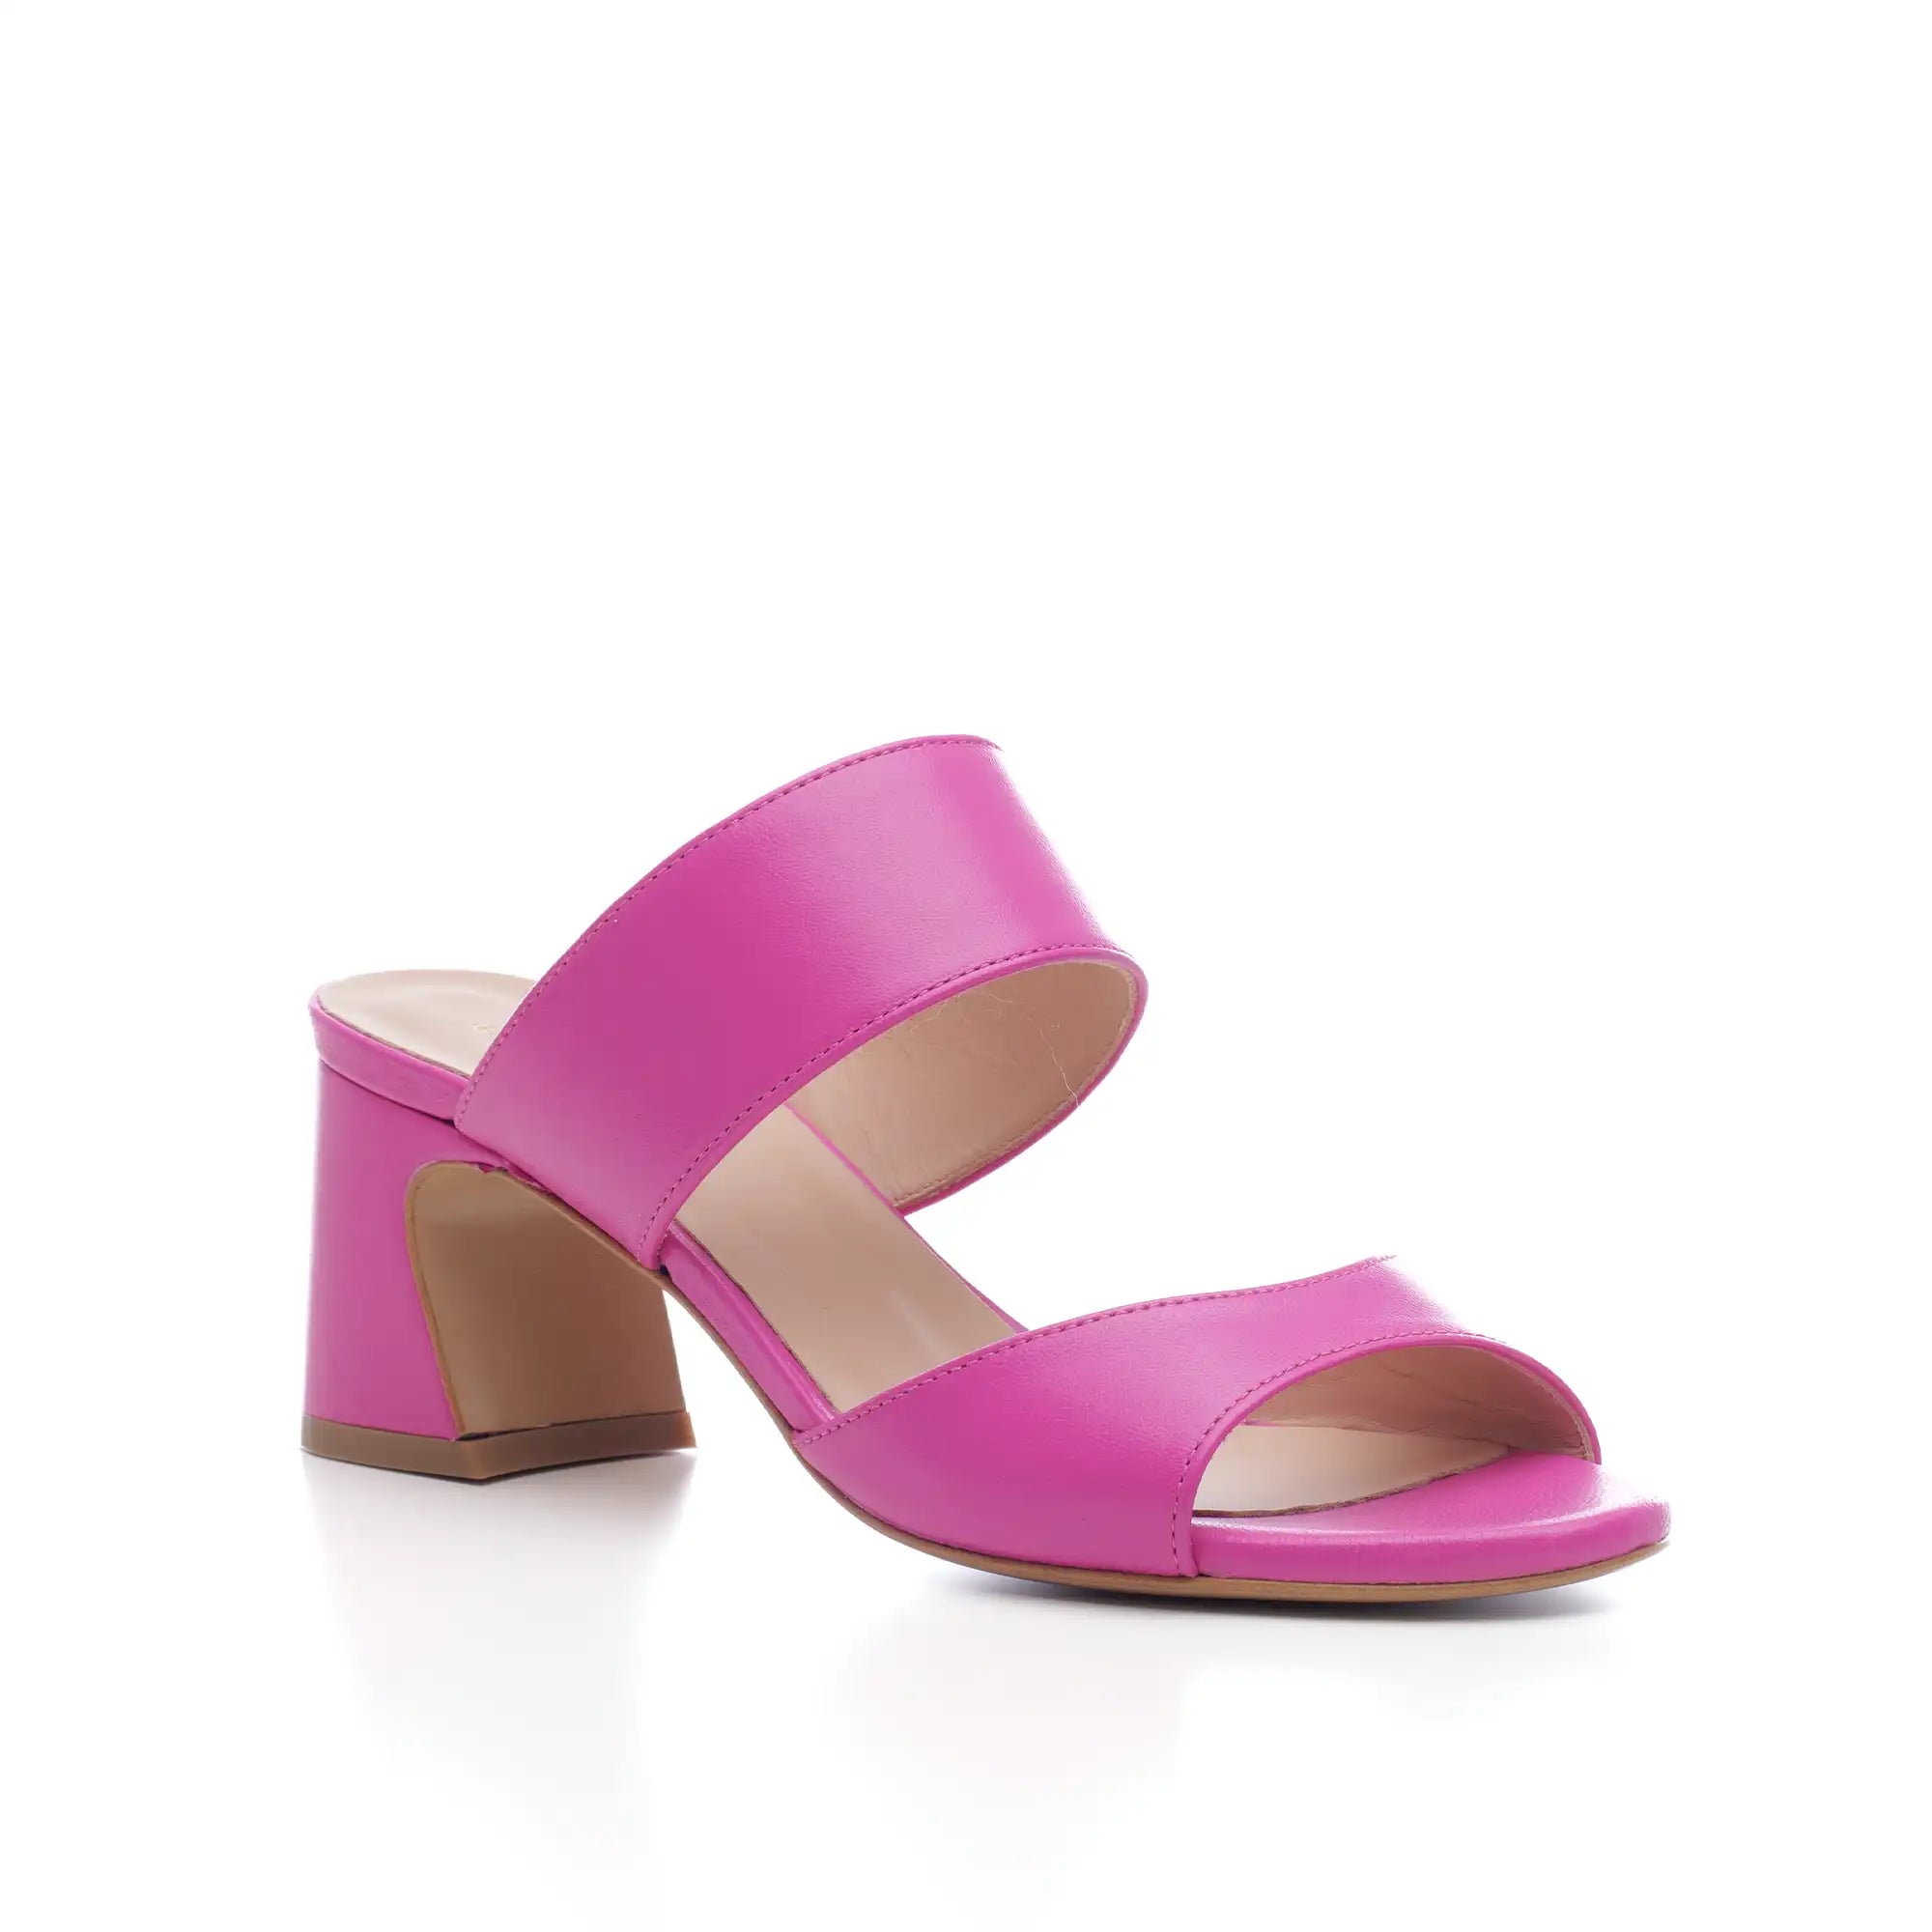 Elle mules sandal with low wide heel and band on the instep in fuchsia leather